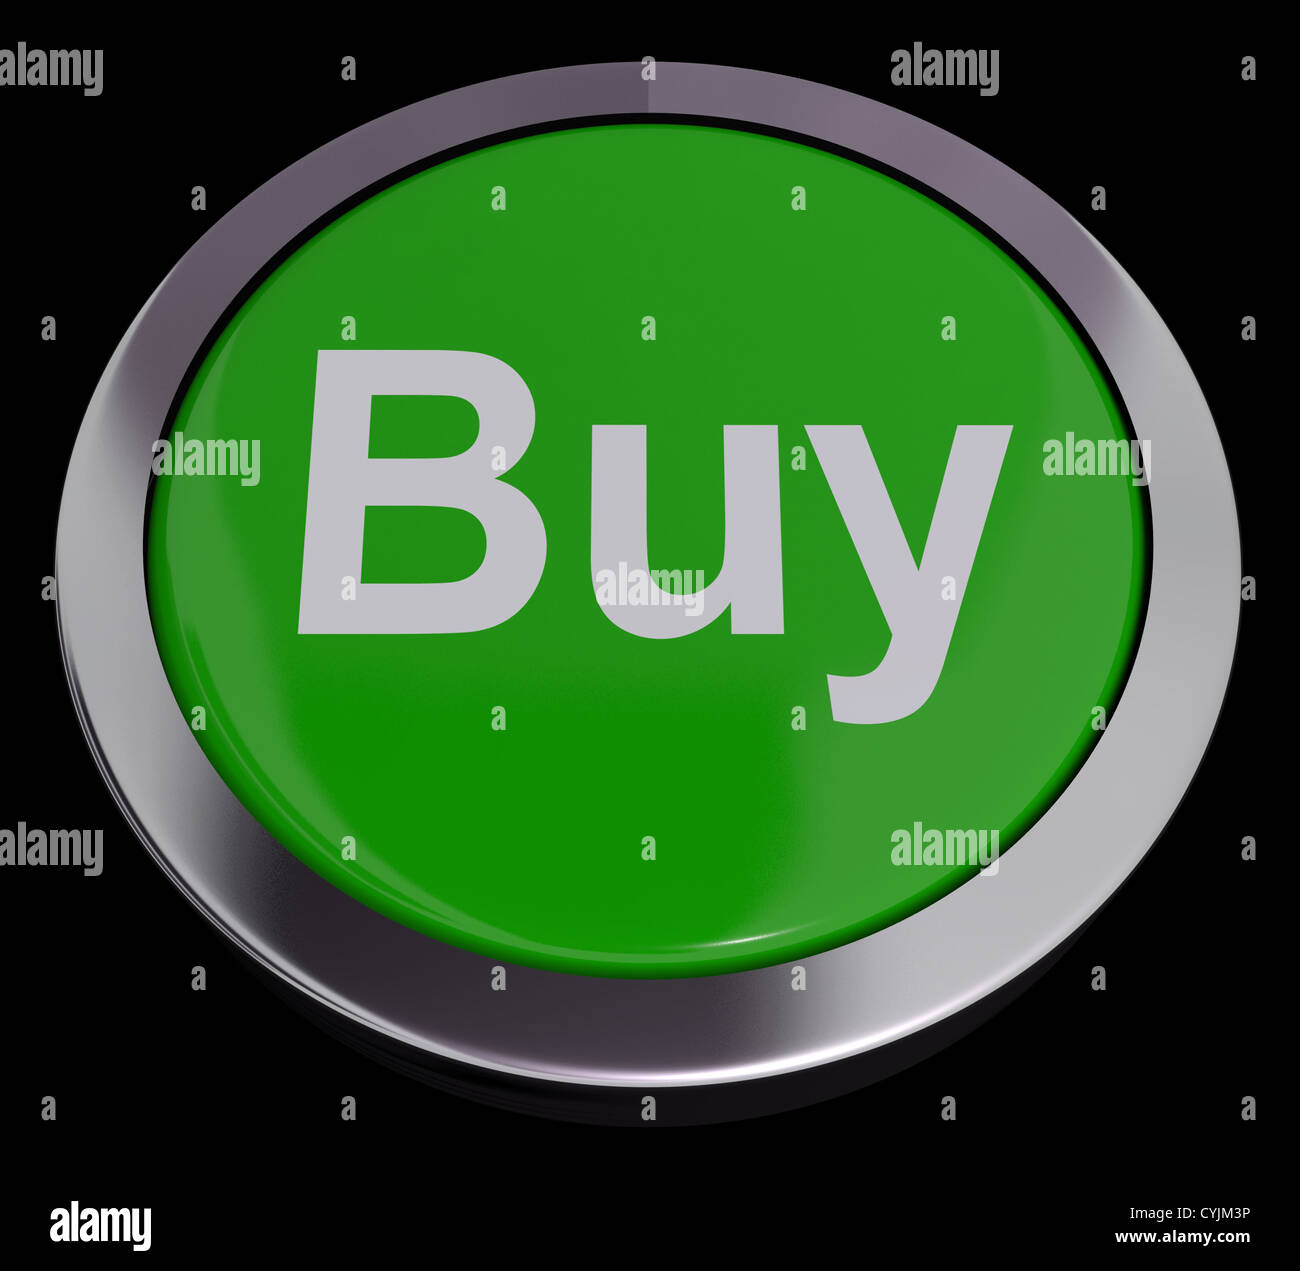 Buy Button For Commerce Or Retail Purchasing Online Stock Photo